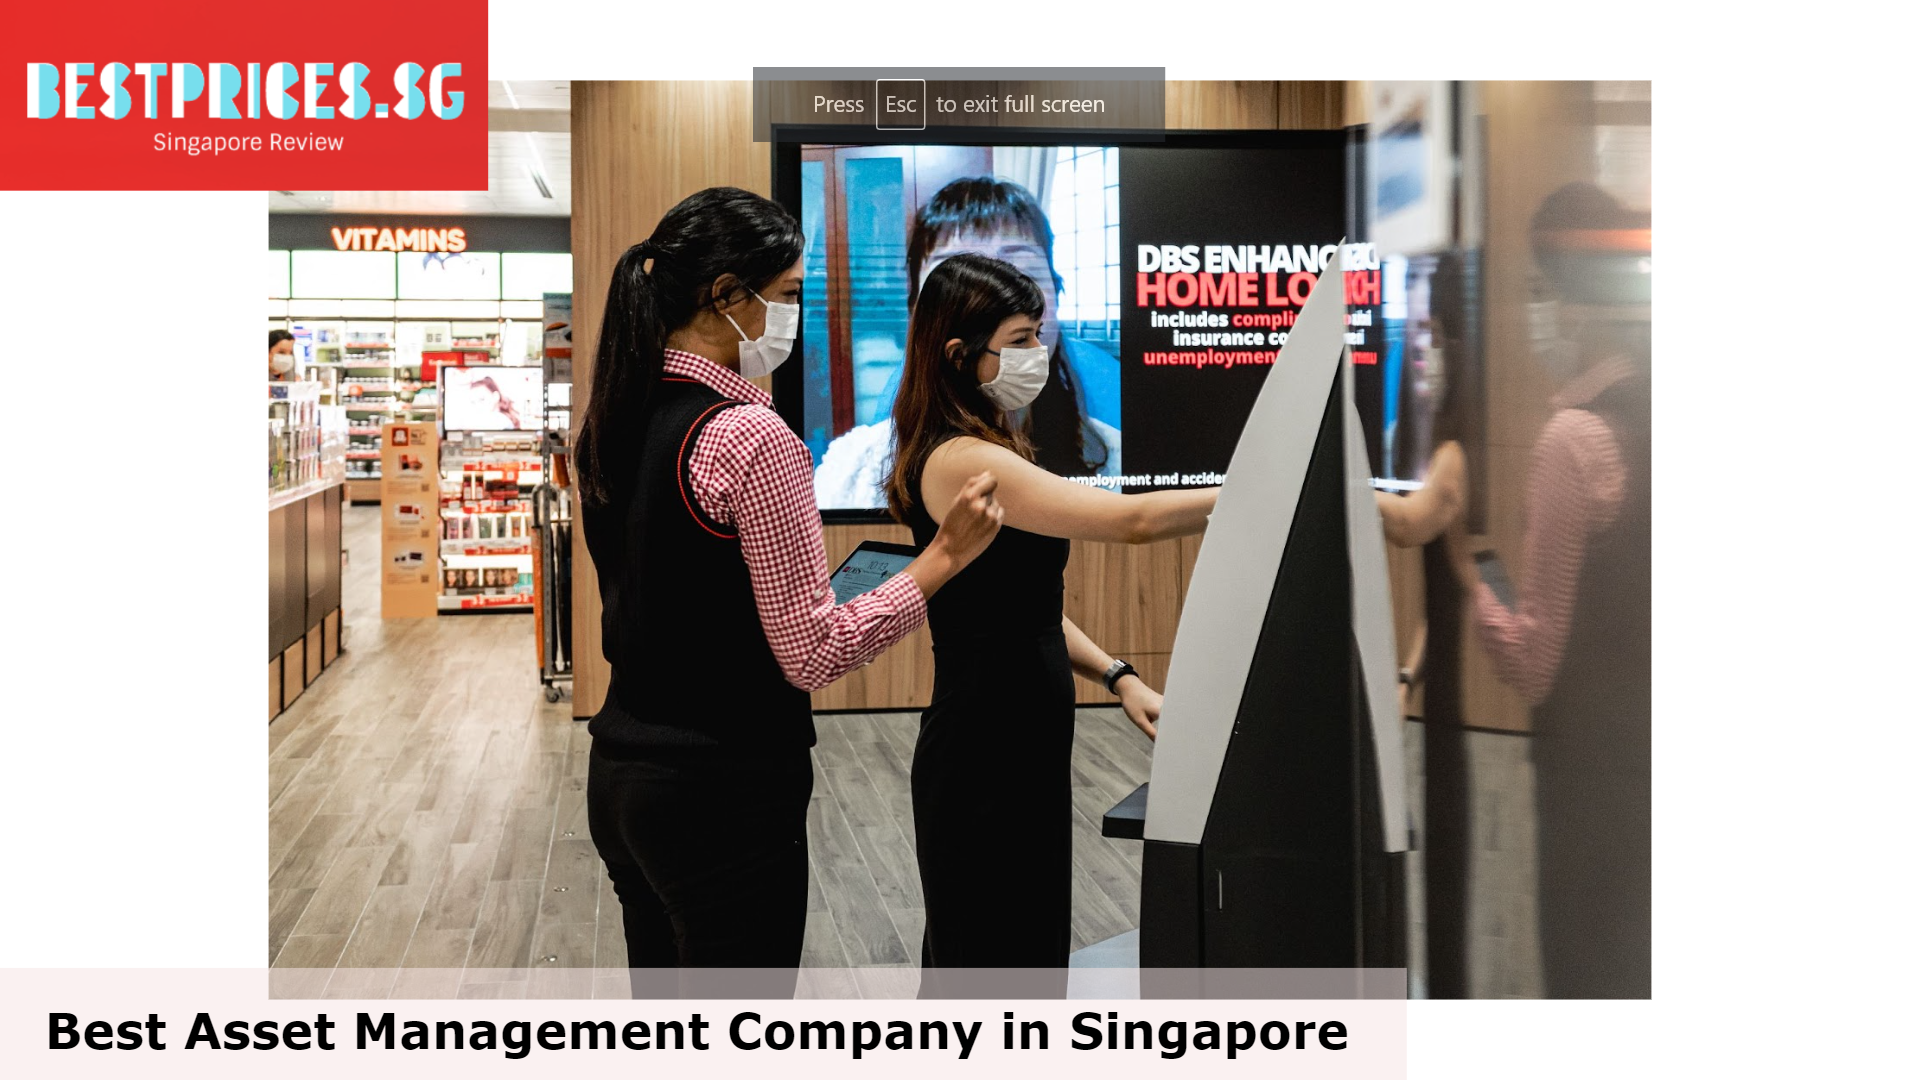 DBS Bank - Best Asset Management Company in Singapore, Asset Management Company Singapore, What does a asset management company do in Singapore?, Who are the big 3 asset managers in Singapore?, How large is Singapore's asset management industry?, What do asset management companies charge in Singapore?, list of asset management companies in singapore, top 10 asset management companies in singapore, top asset management firms singapore, singapore asset management industry 2023, boutique asset management firms singapore, singapore asset management jobs, mas asset management, Who is the best fund manager in Asia?, How many asset managers are there in Singapore?, oes asset management pay well?, How much does asset management cost?, What does an asset manager do?, 